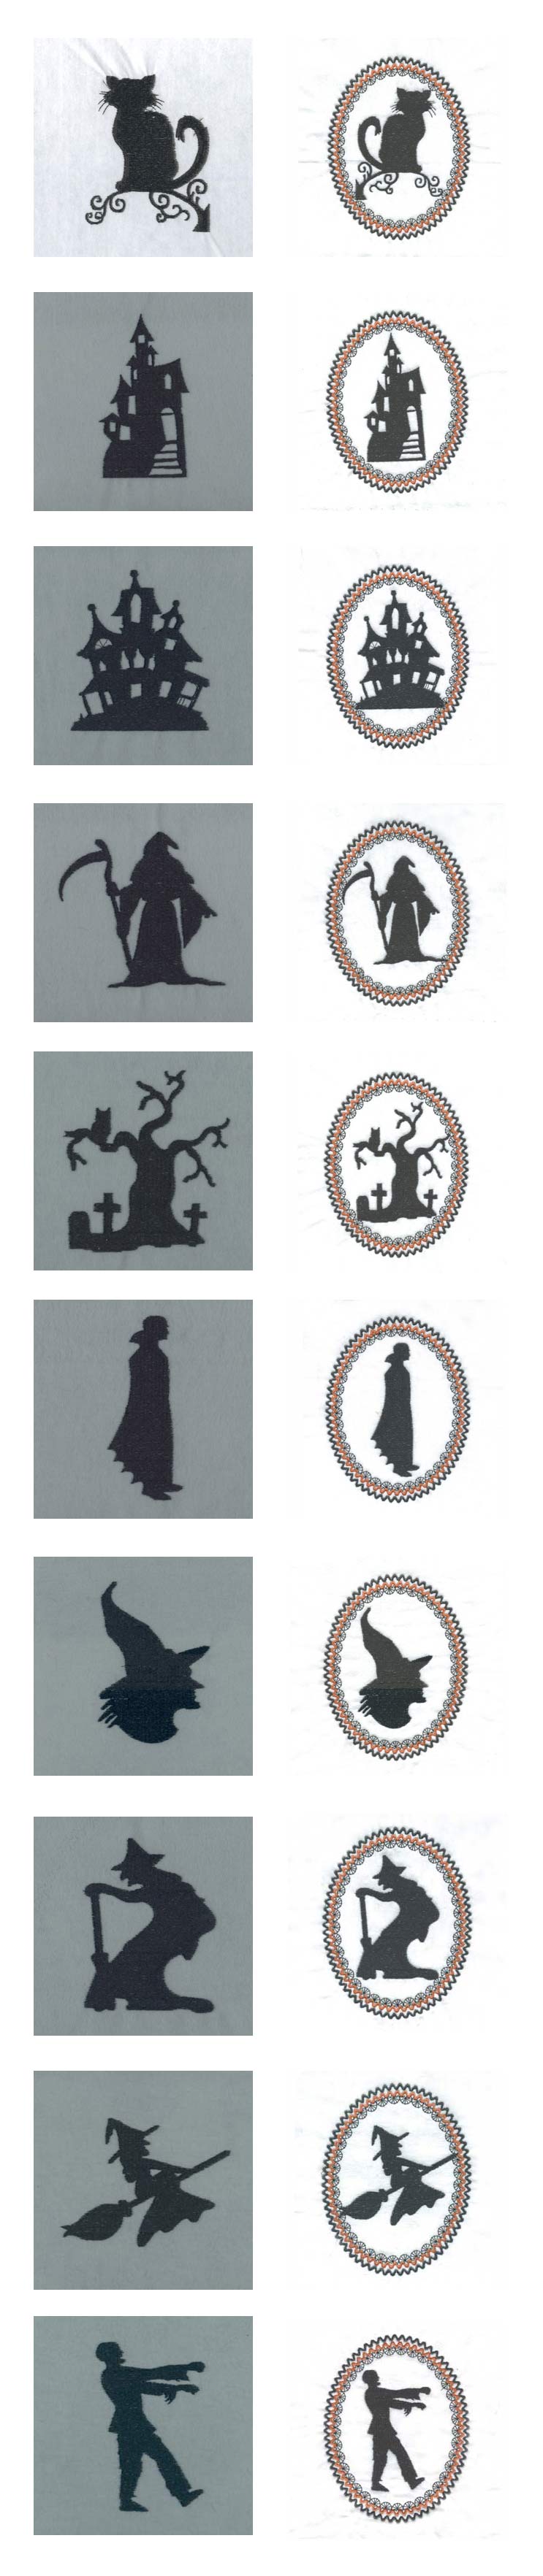 Halloween Silhouettes Embroidery Machine Design Details